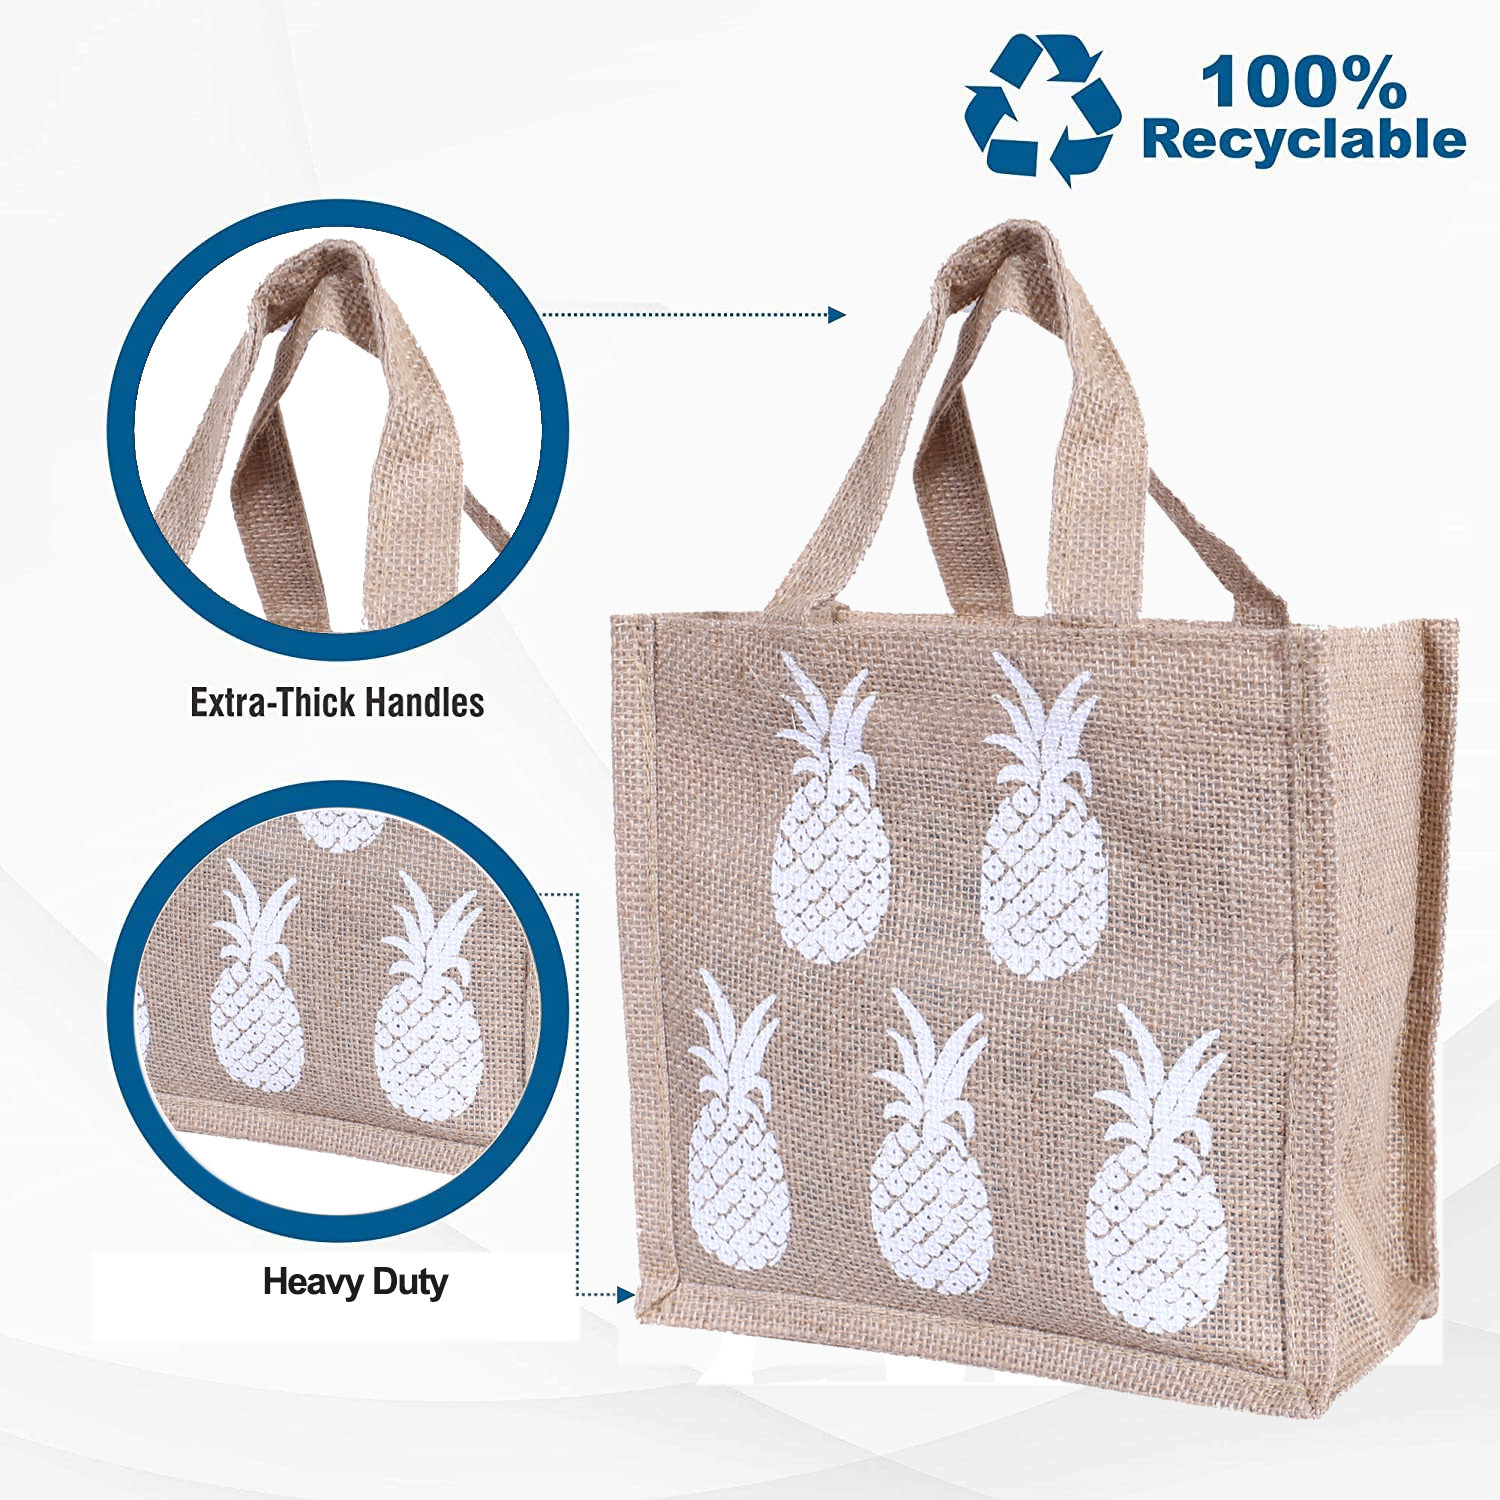 Kuber Industries Lunch Bag|Reusable Jute Fabric Tote Bag|Pineapple Print Tiffin Carry Hand bag with Handle For office,School,Gift (Brown)